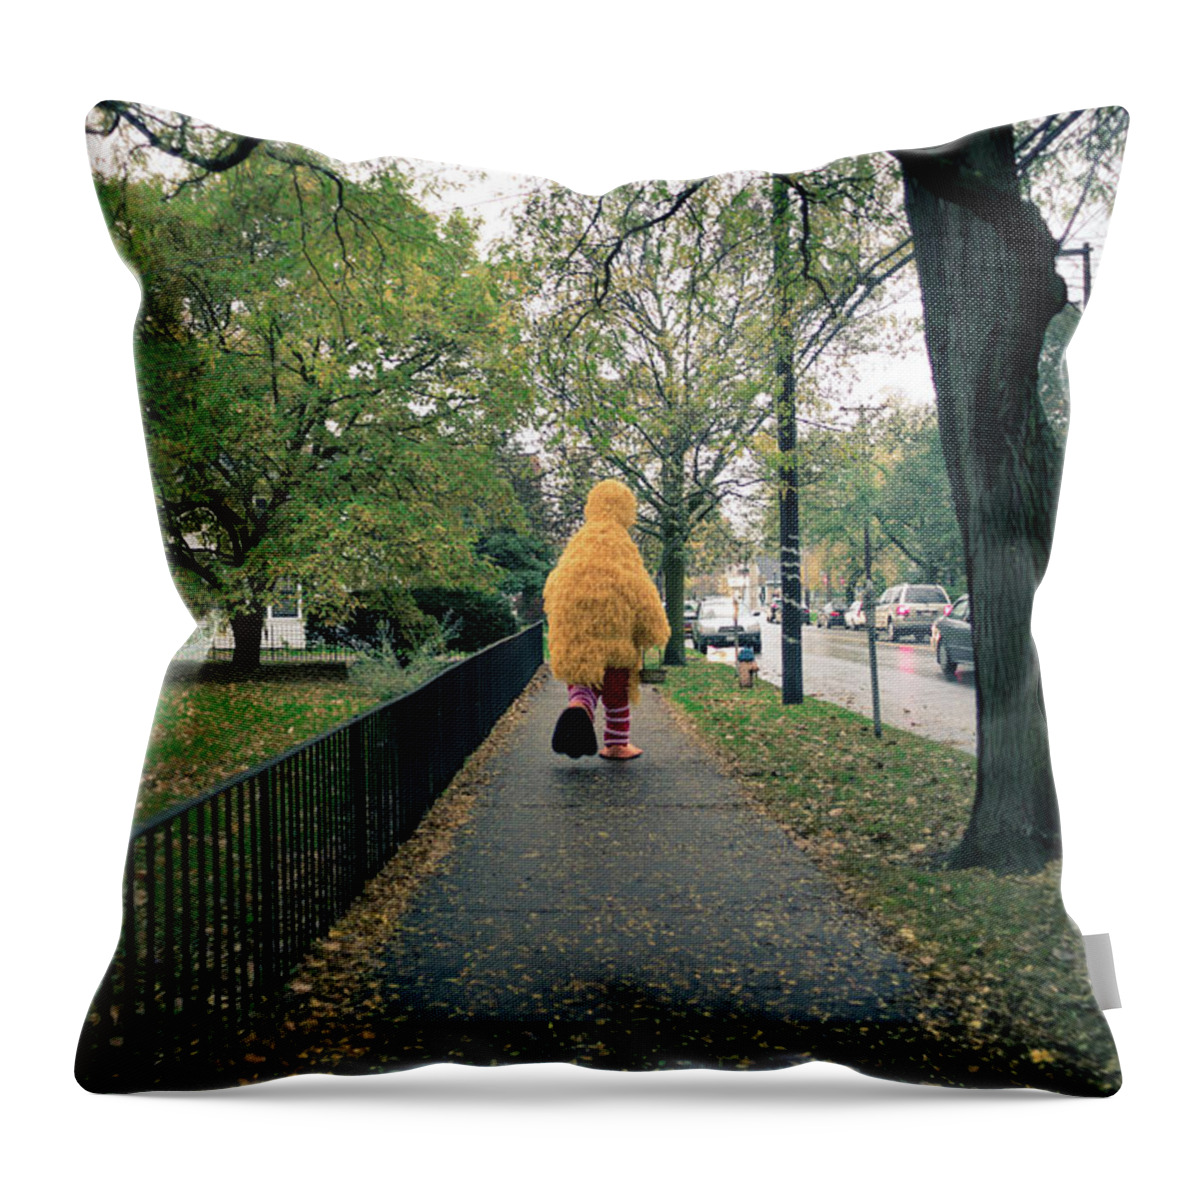 Grass Throw Pillow featuring the photograph Solo Costume On Halloween by Tyler Finck Www.sursly.com